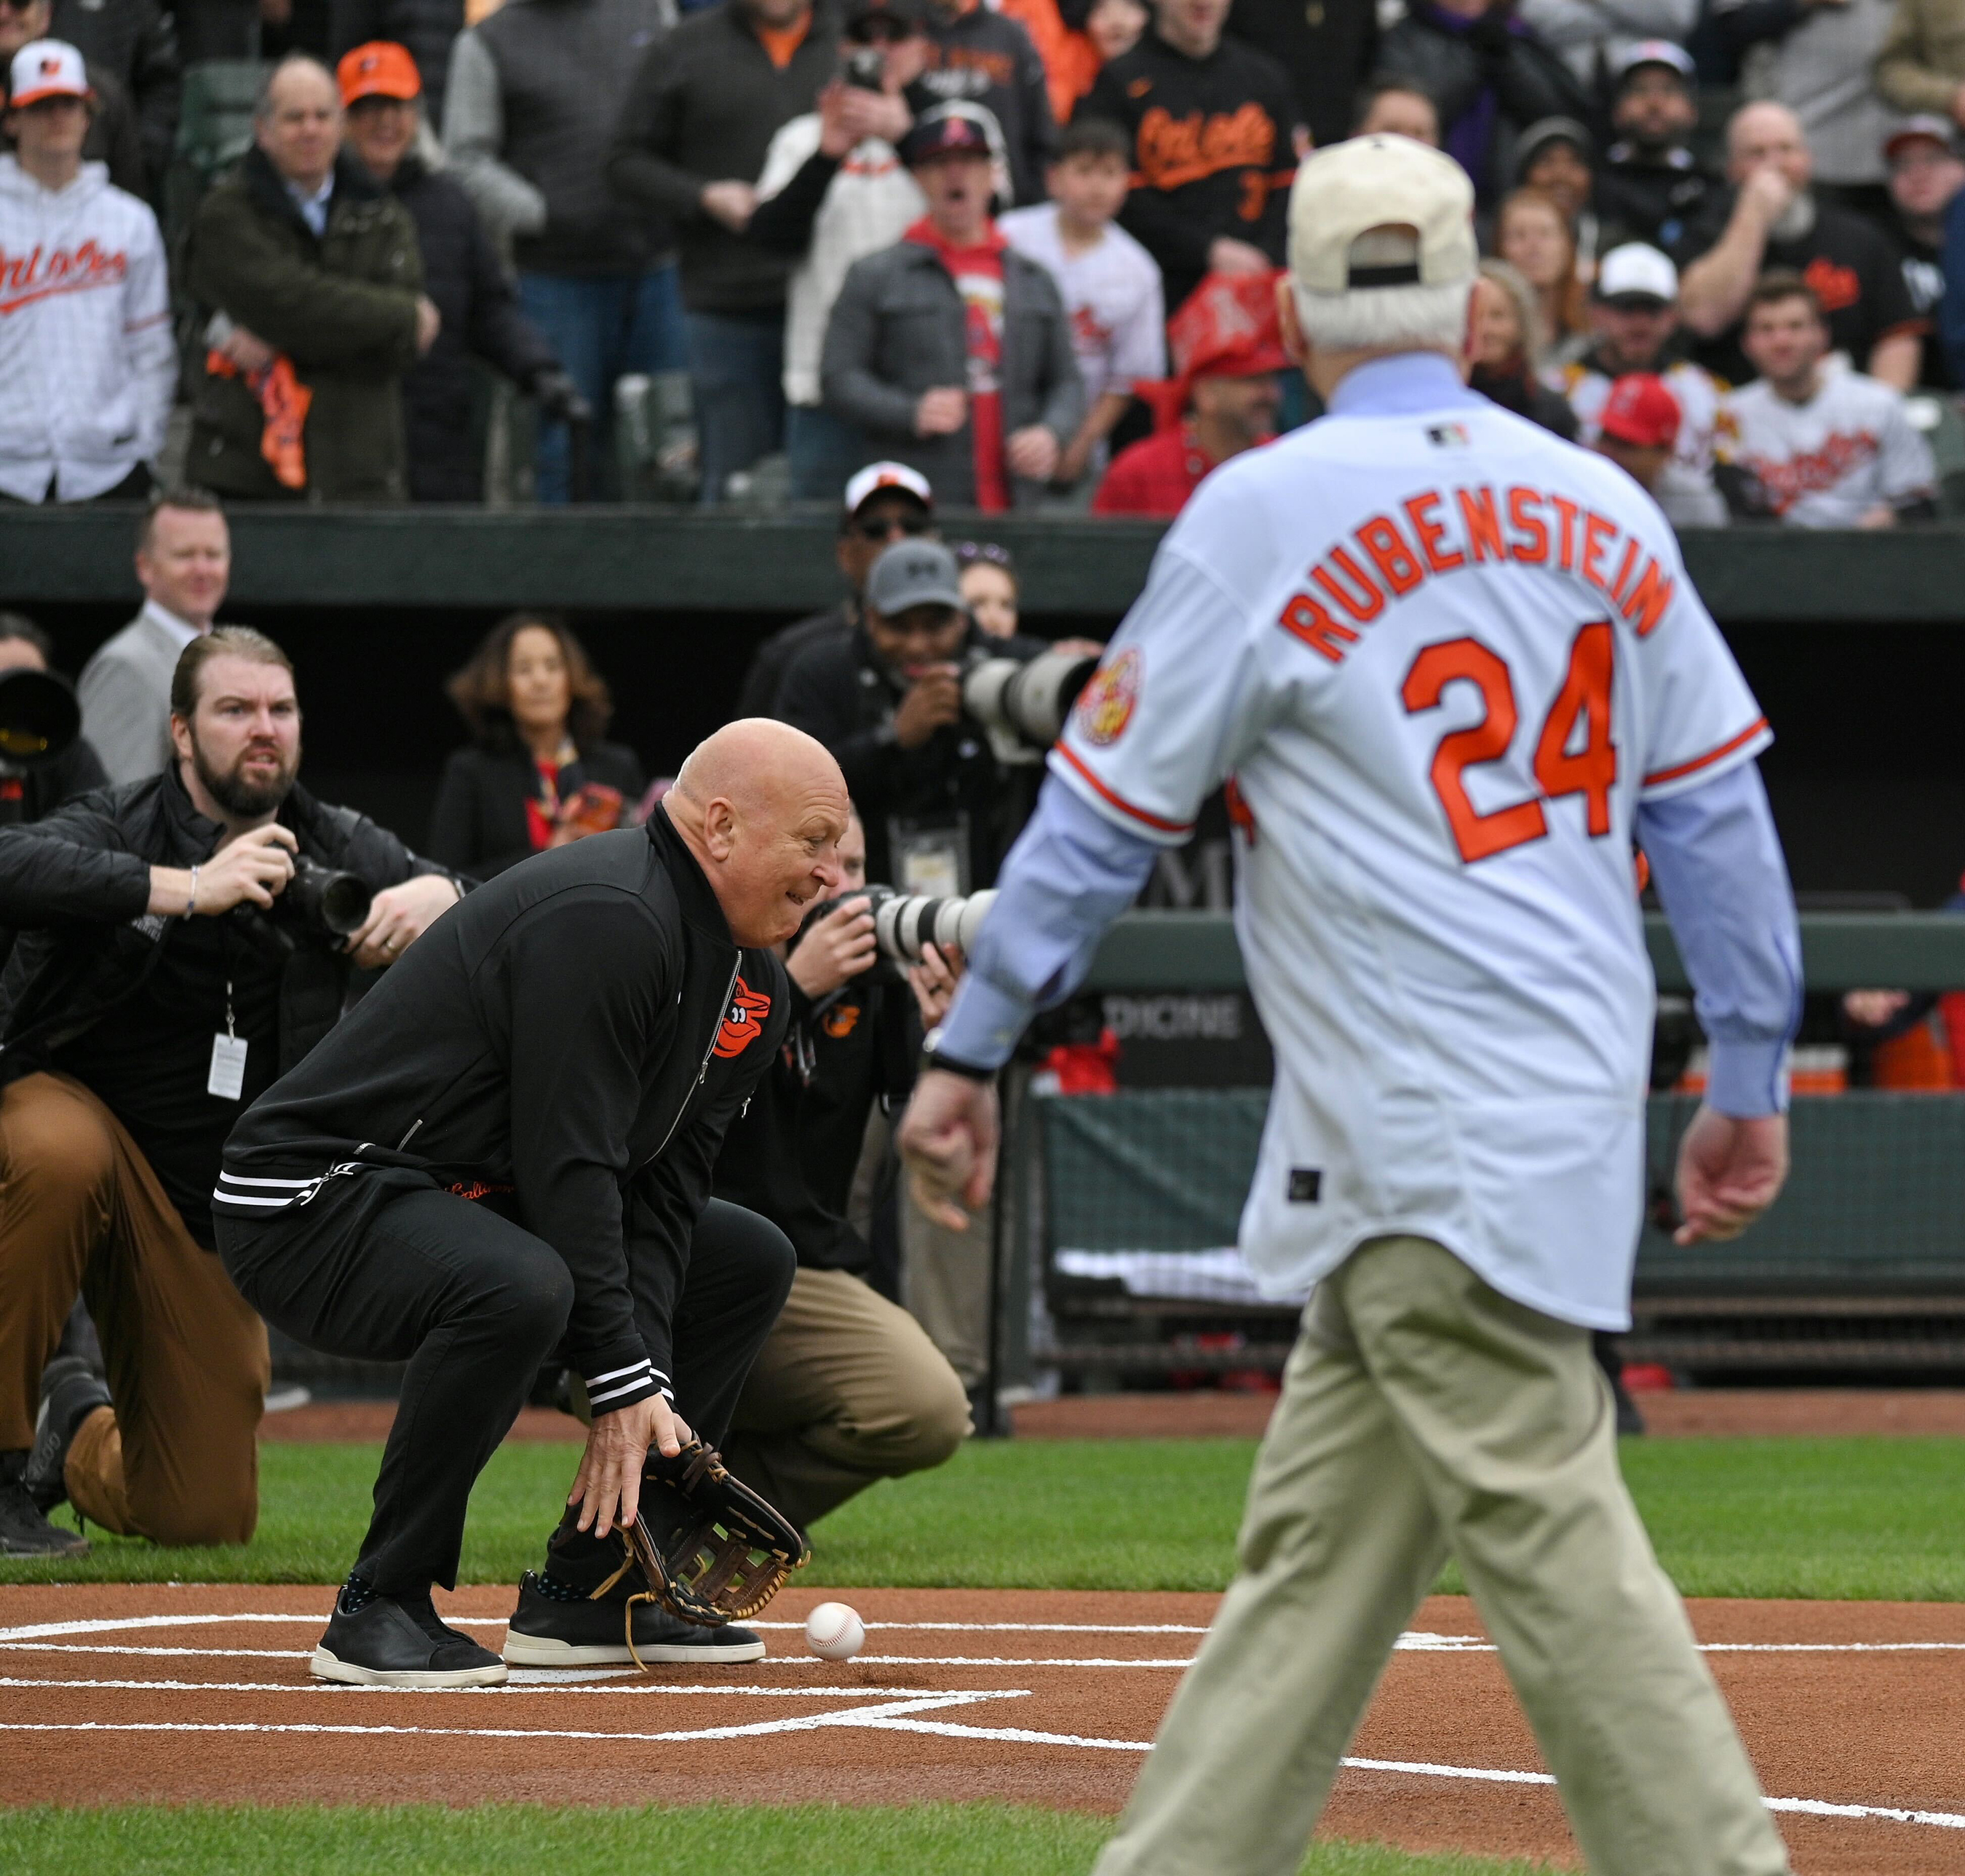 March 28, 2024: Former Orioles player Cal Ripken Jr. attempts to catch the ceremonial first pitch thrown by Aubree Singletary during opening day ceremonies at Oriole Park at Camden Yards. The new owner, David Rubenstein, watches the exchange. (Kenneth K. Lam/Staff)